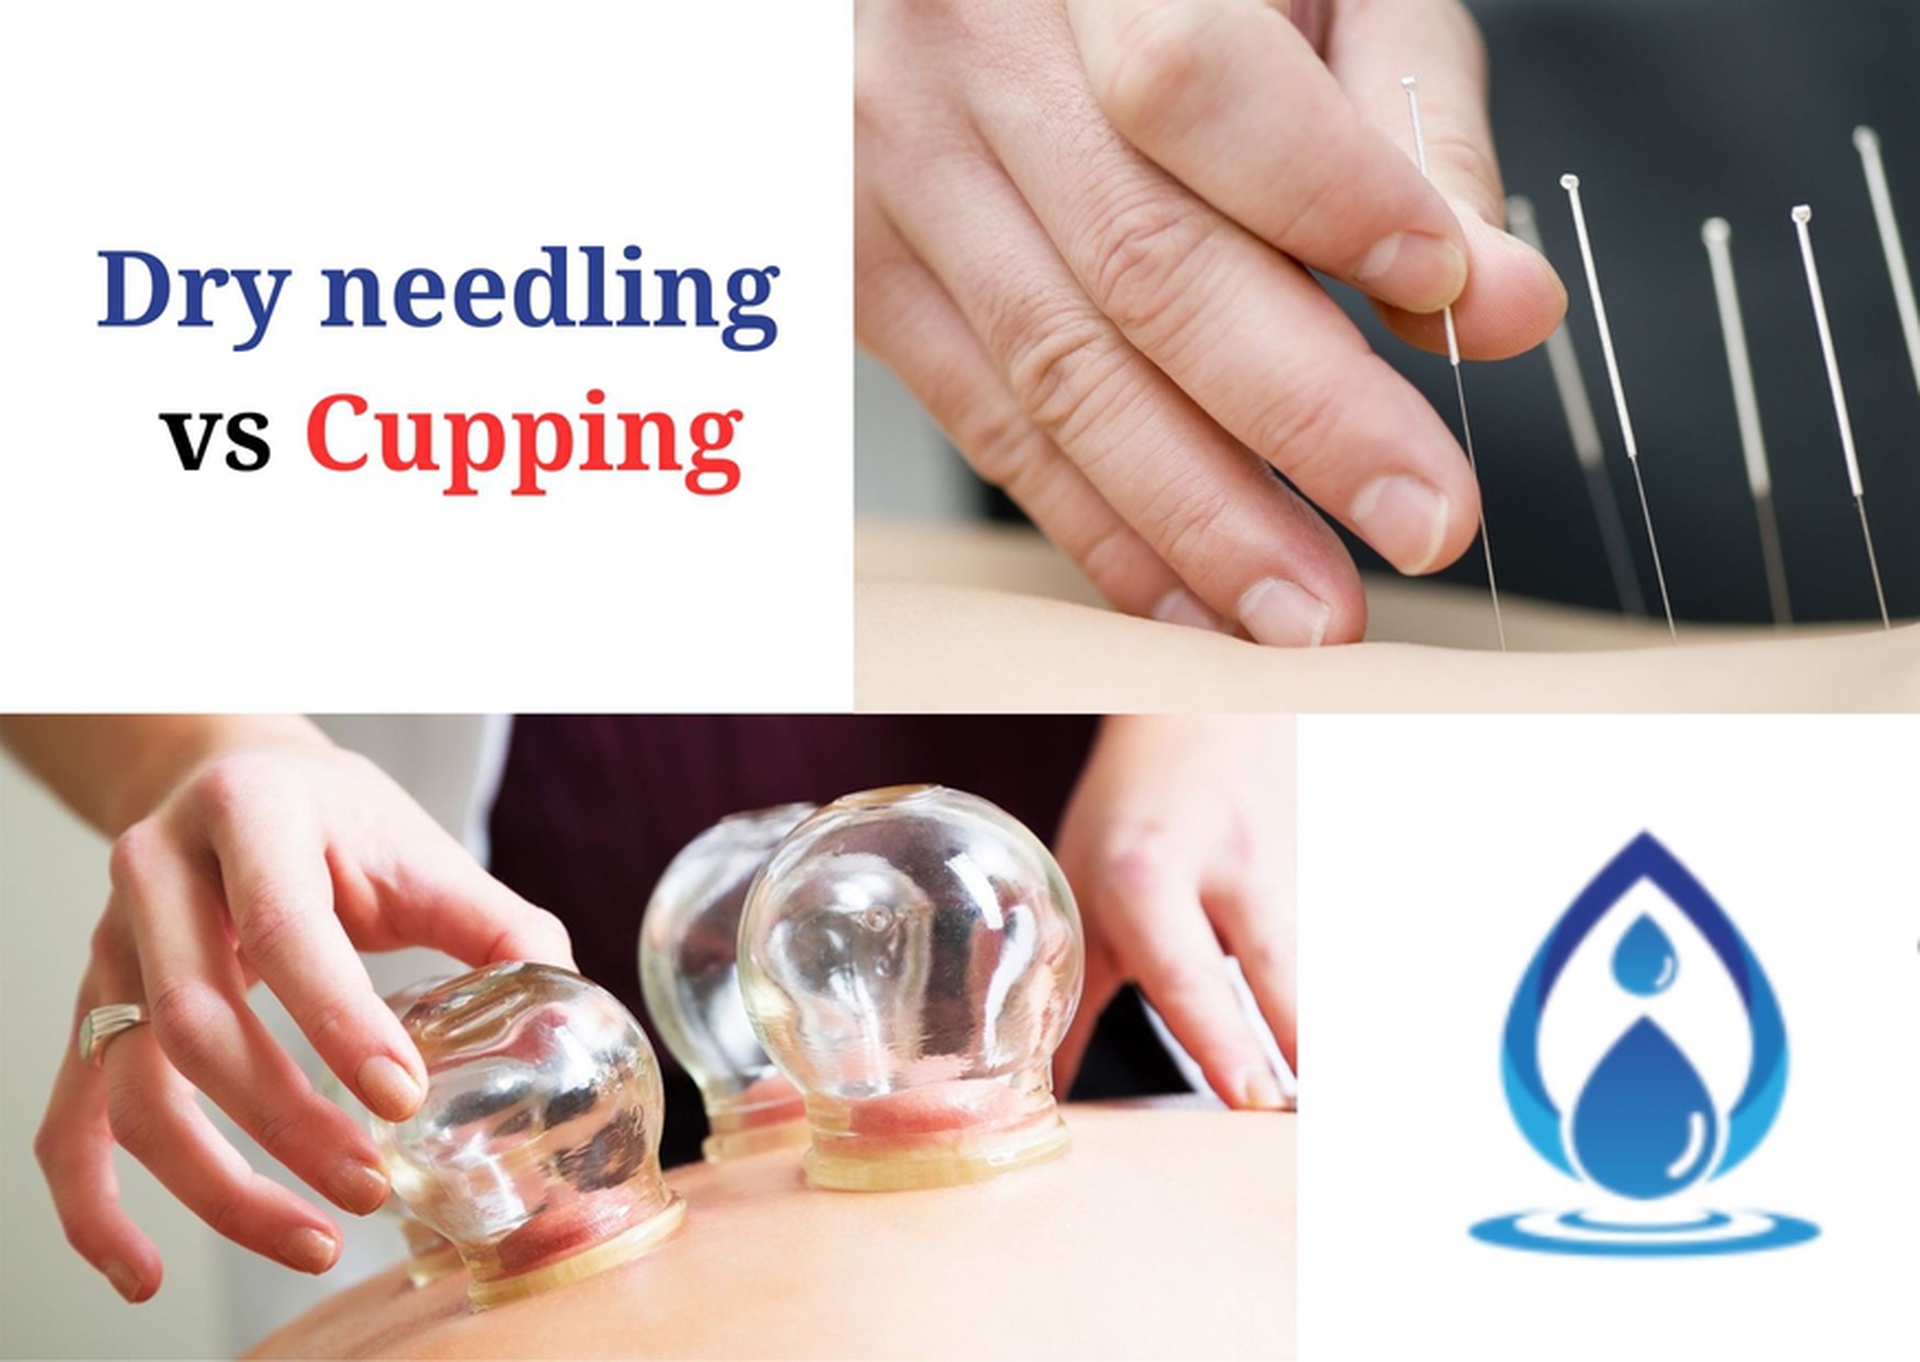 dry needling vs cupping what to choose